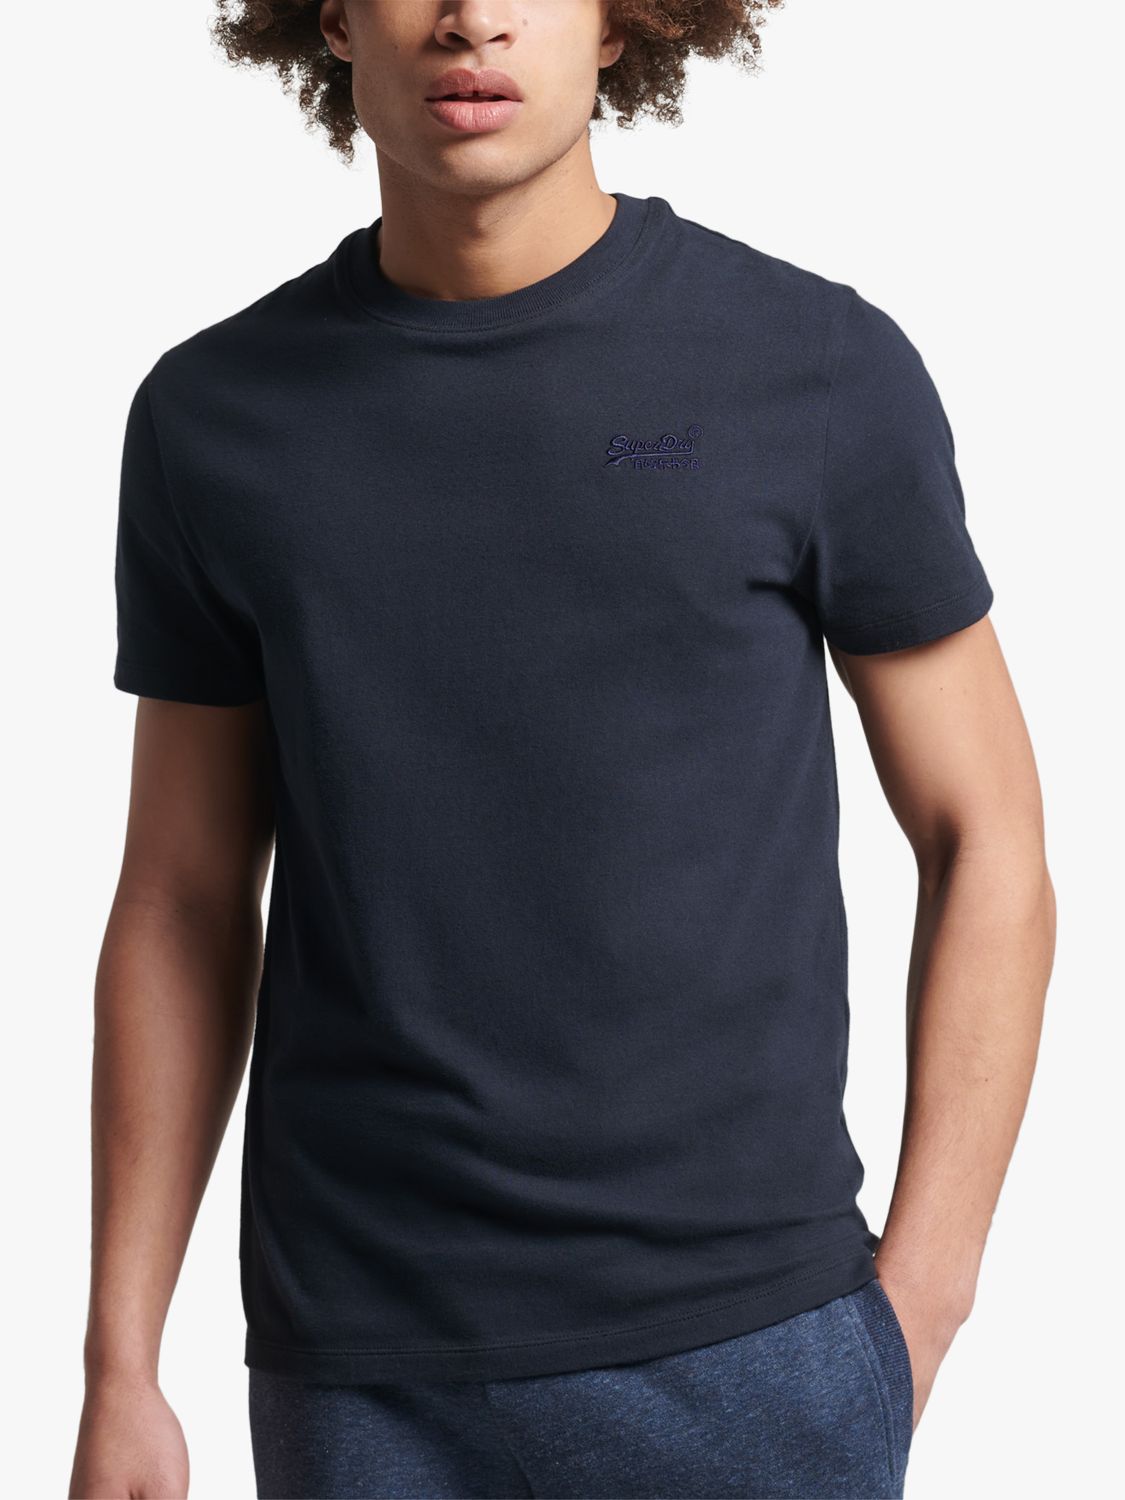 Superdry Organic Cotton Logo & Navy at Embroidered T-Shirt, Partners John Eclipse Vintage Lewis